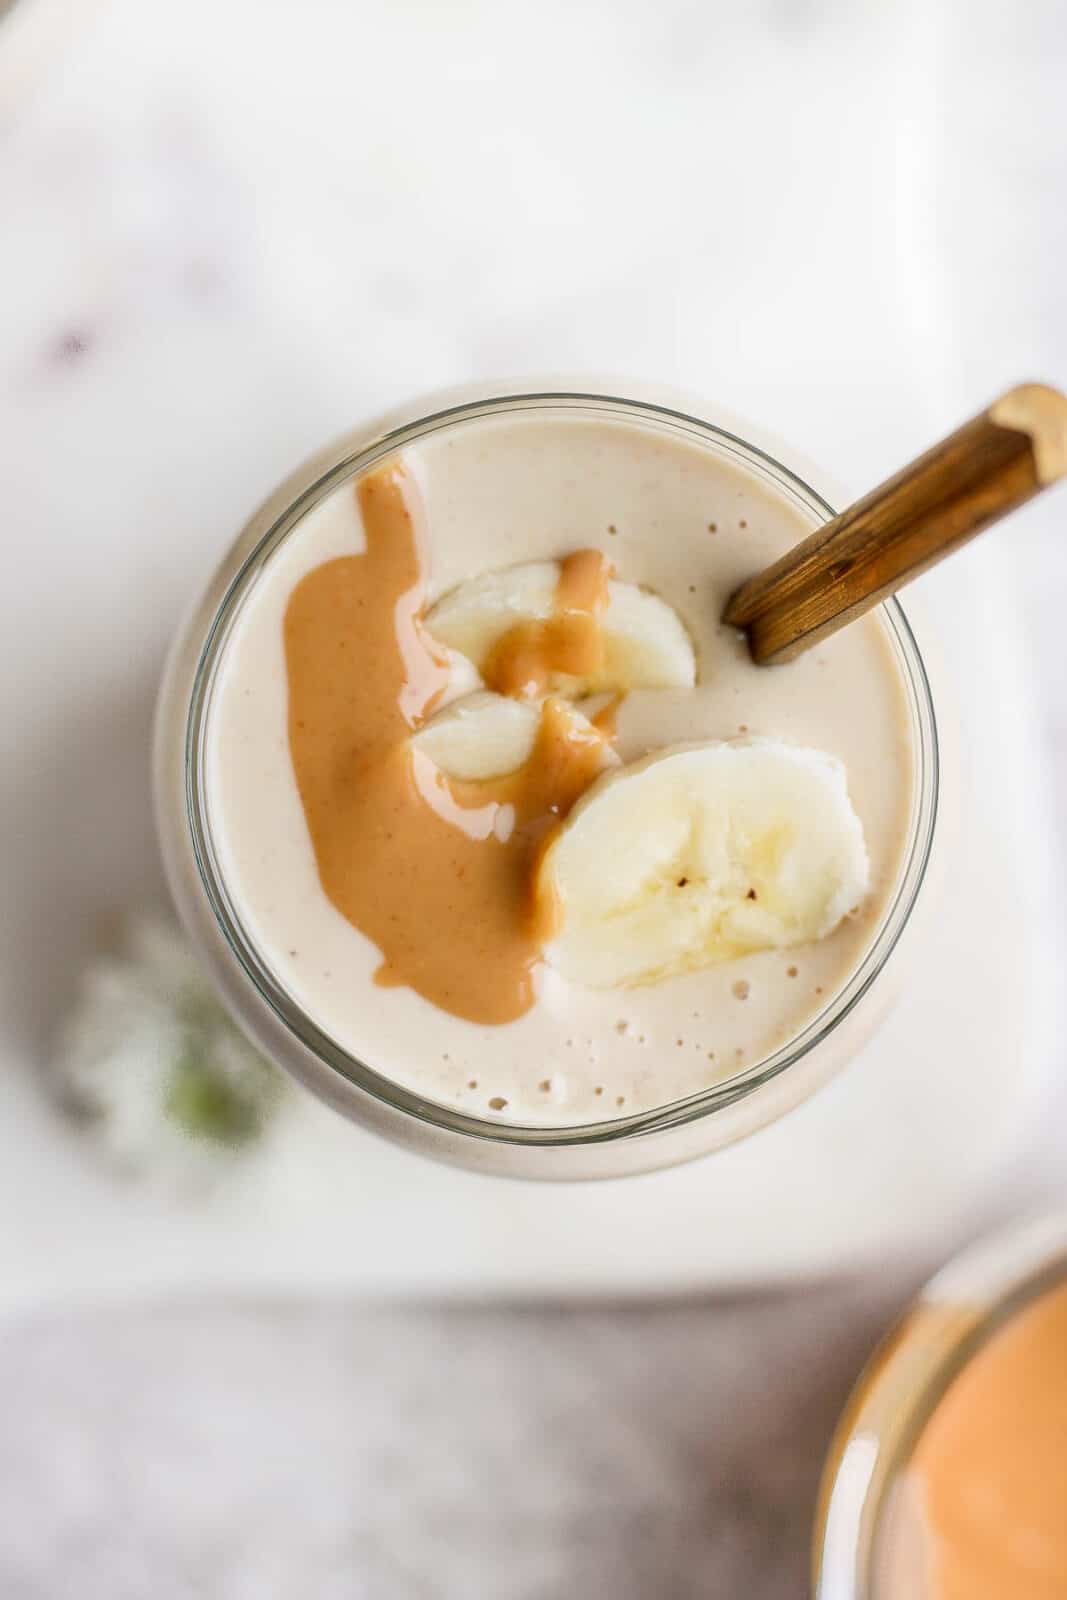 Peanut butter banana smoothie in a glass with some peanut butter and banana slices on top.